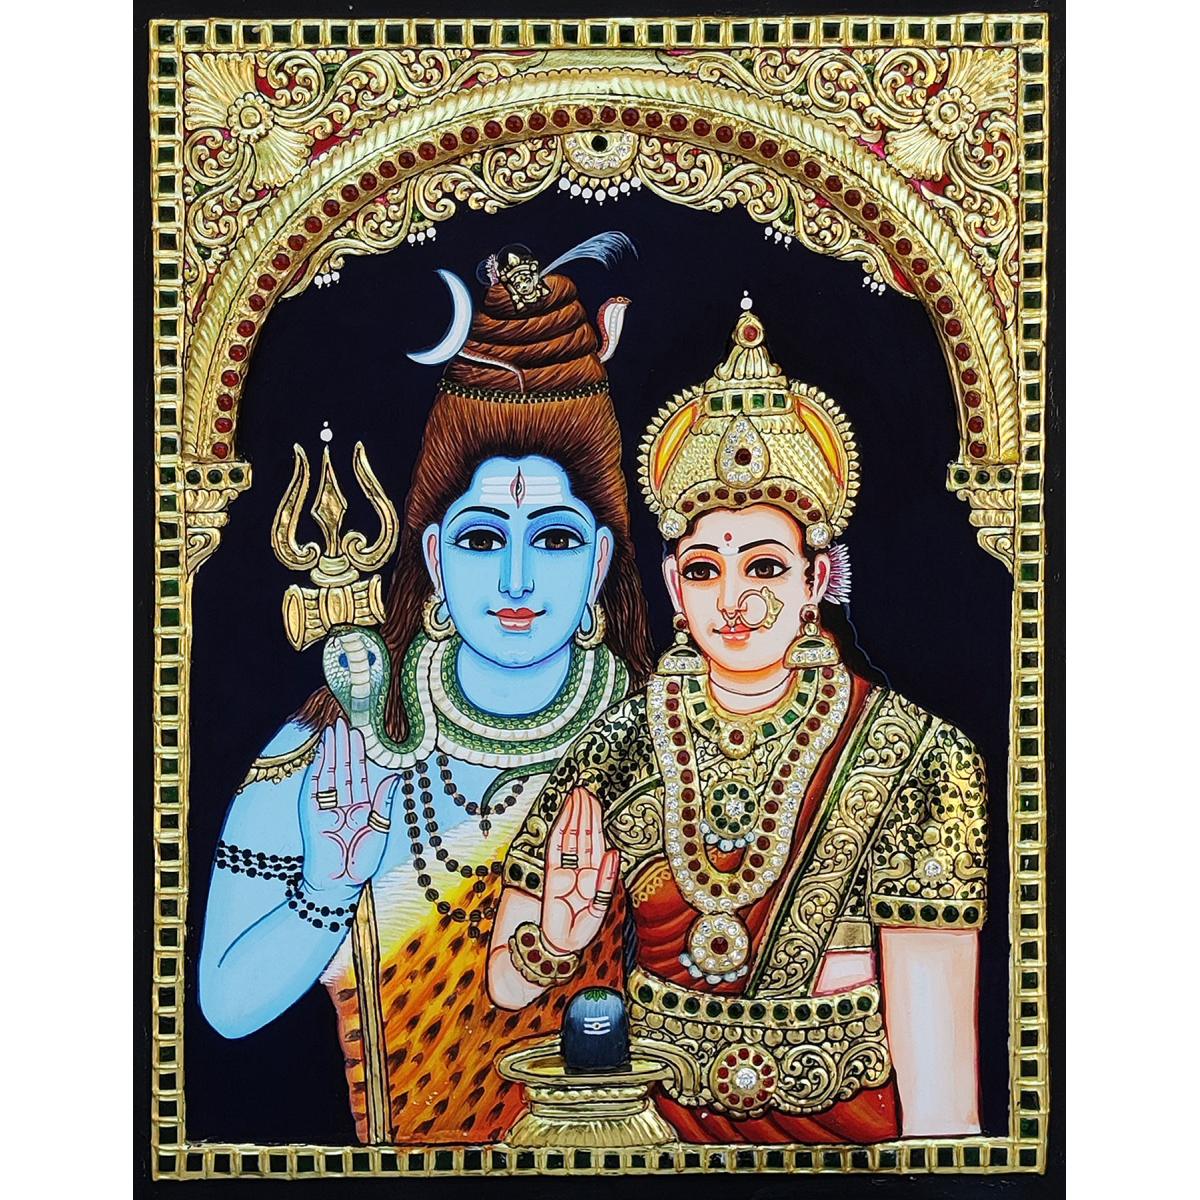 TANJORE PAINTING SHIVA PARVATHY